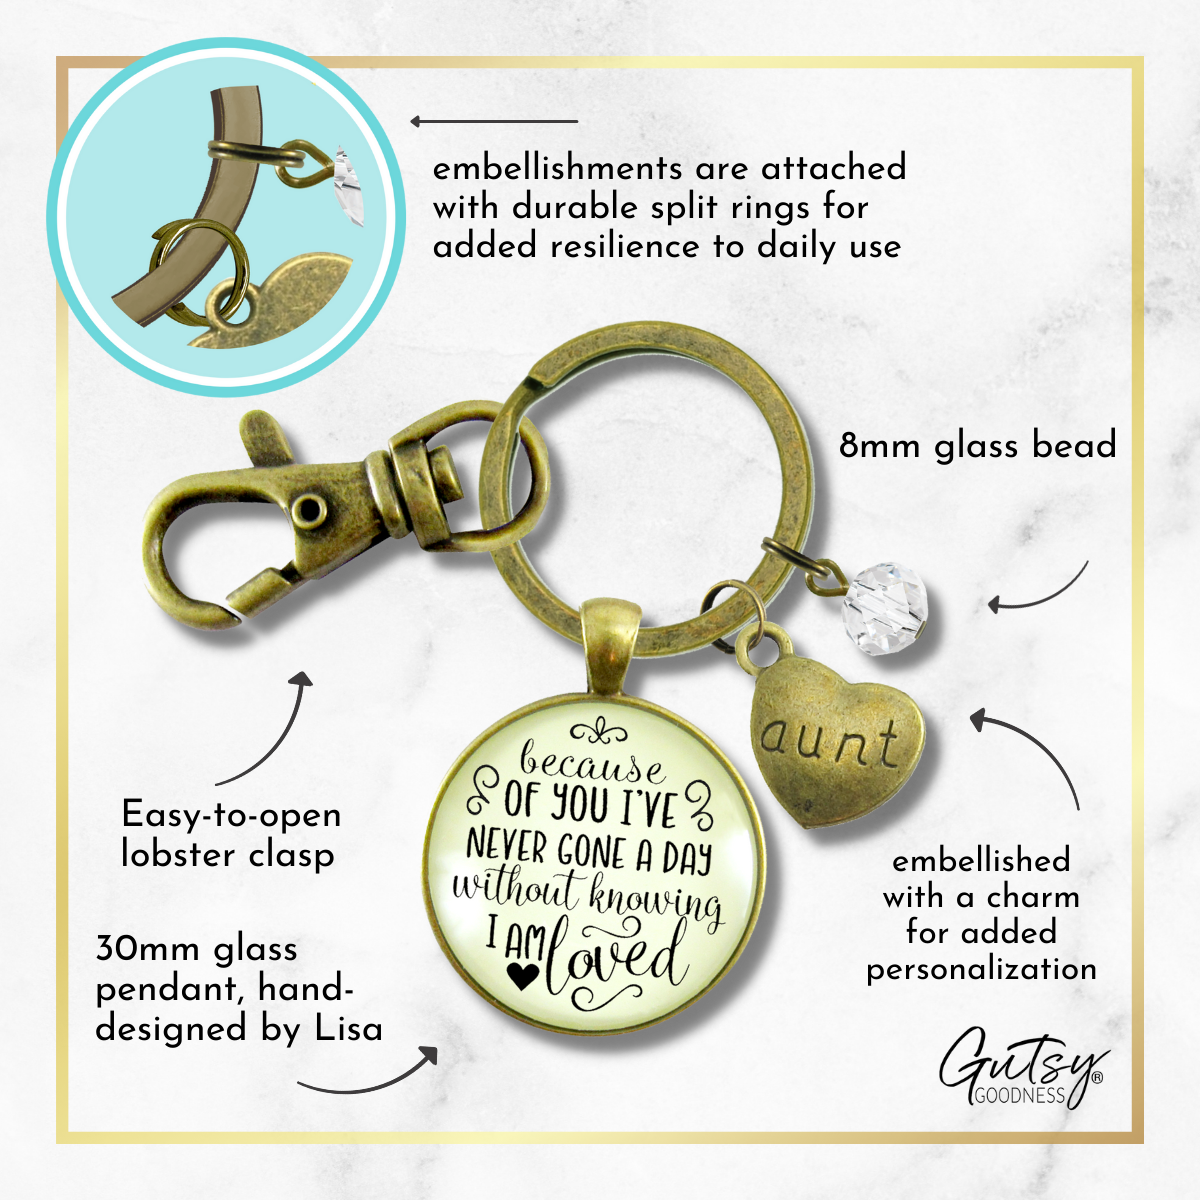 Sassy Auntie Keychain Glam Quote Fun Gift Vintage Inspired Jewelry For Women - Gutsy Goodness Handmade Jewelry;Sassy Auntie Keychain Glam Quote Fun Gift Vintage Inspired Jewelry For Women - Gutsy Goodness Handmade Jewelry Gifts